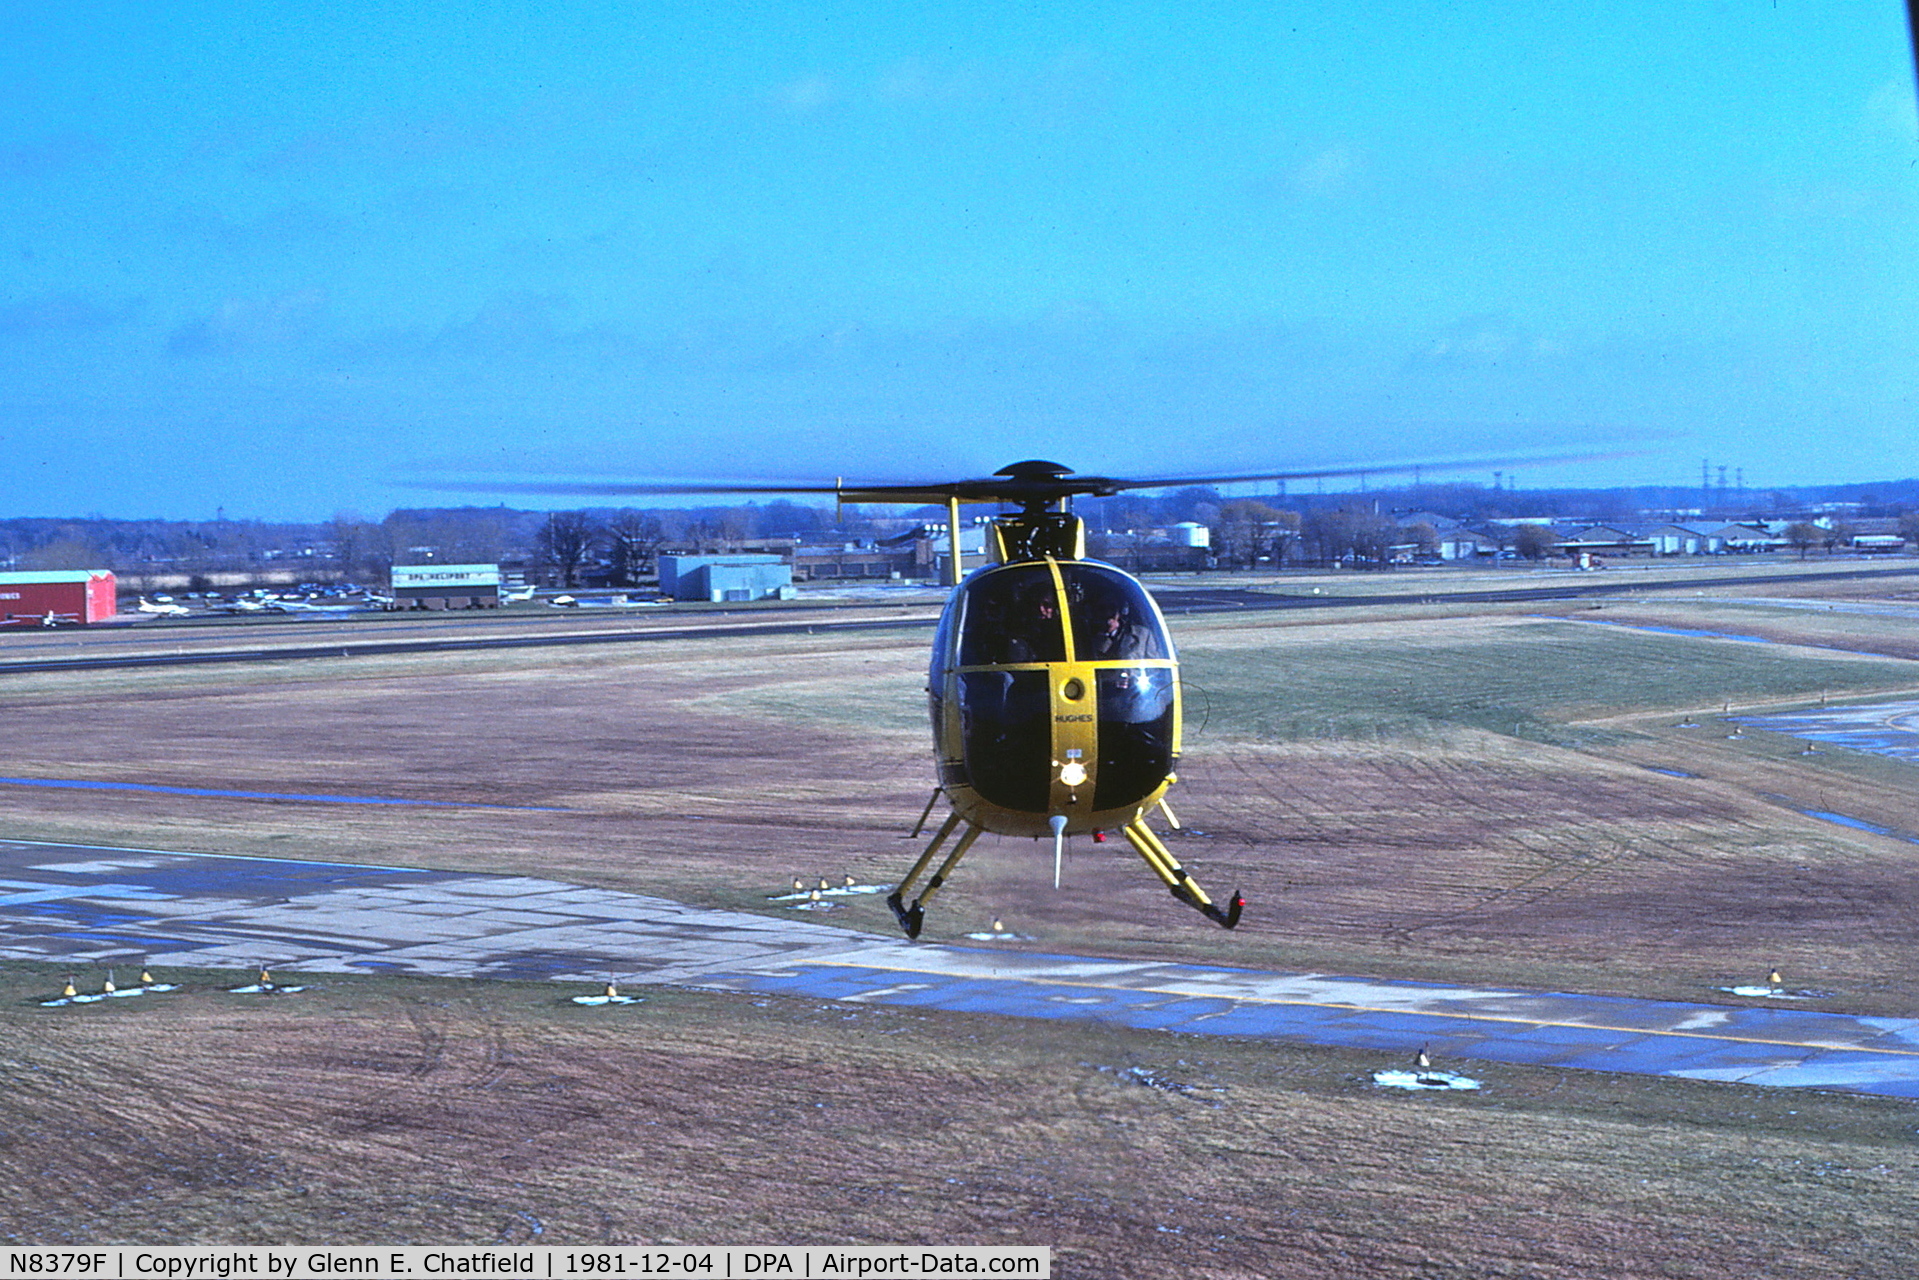 N8379F, 1978 Hughes 369D C/N 480291D, Looking SE from the control tower - the chopper was giving rides to the controllers